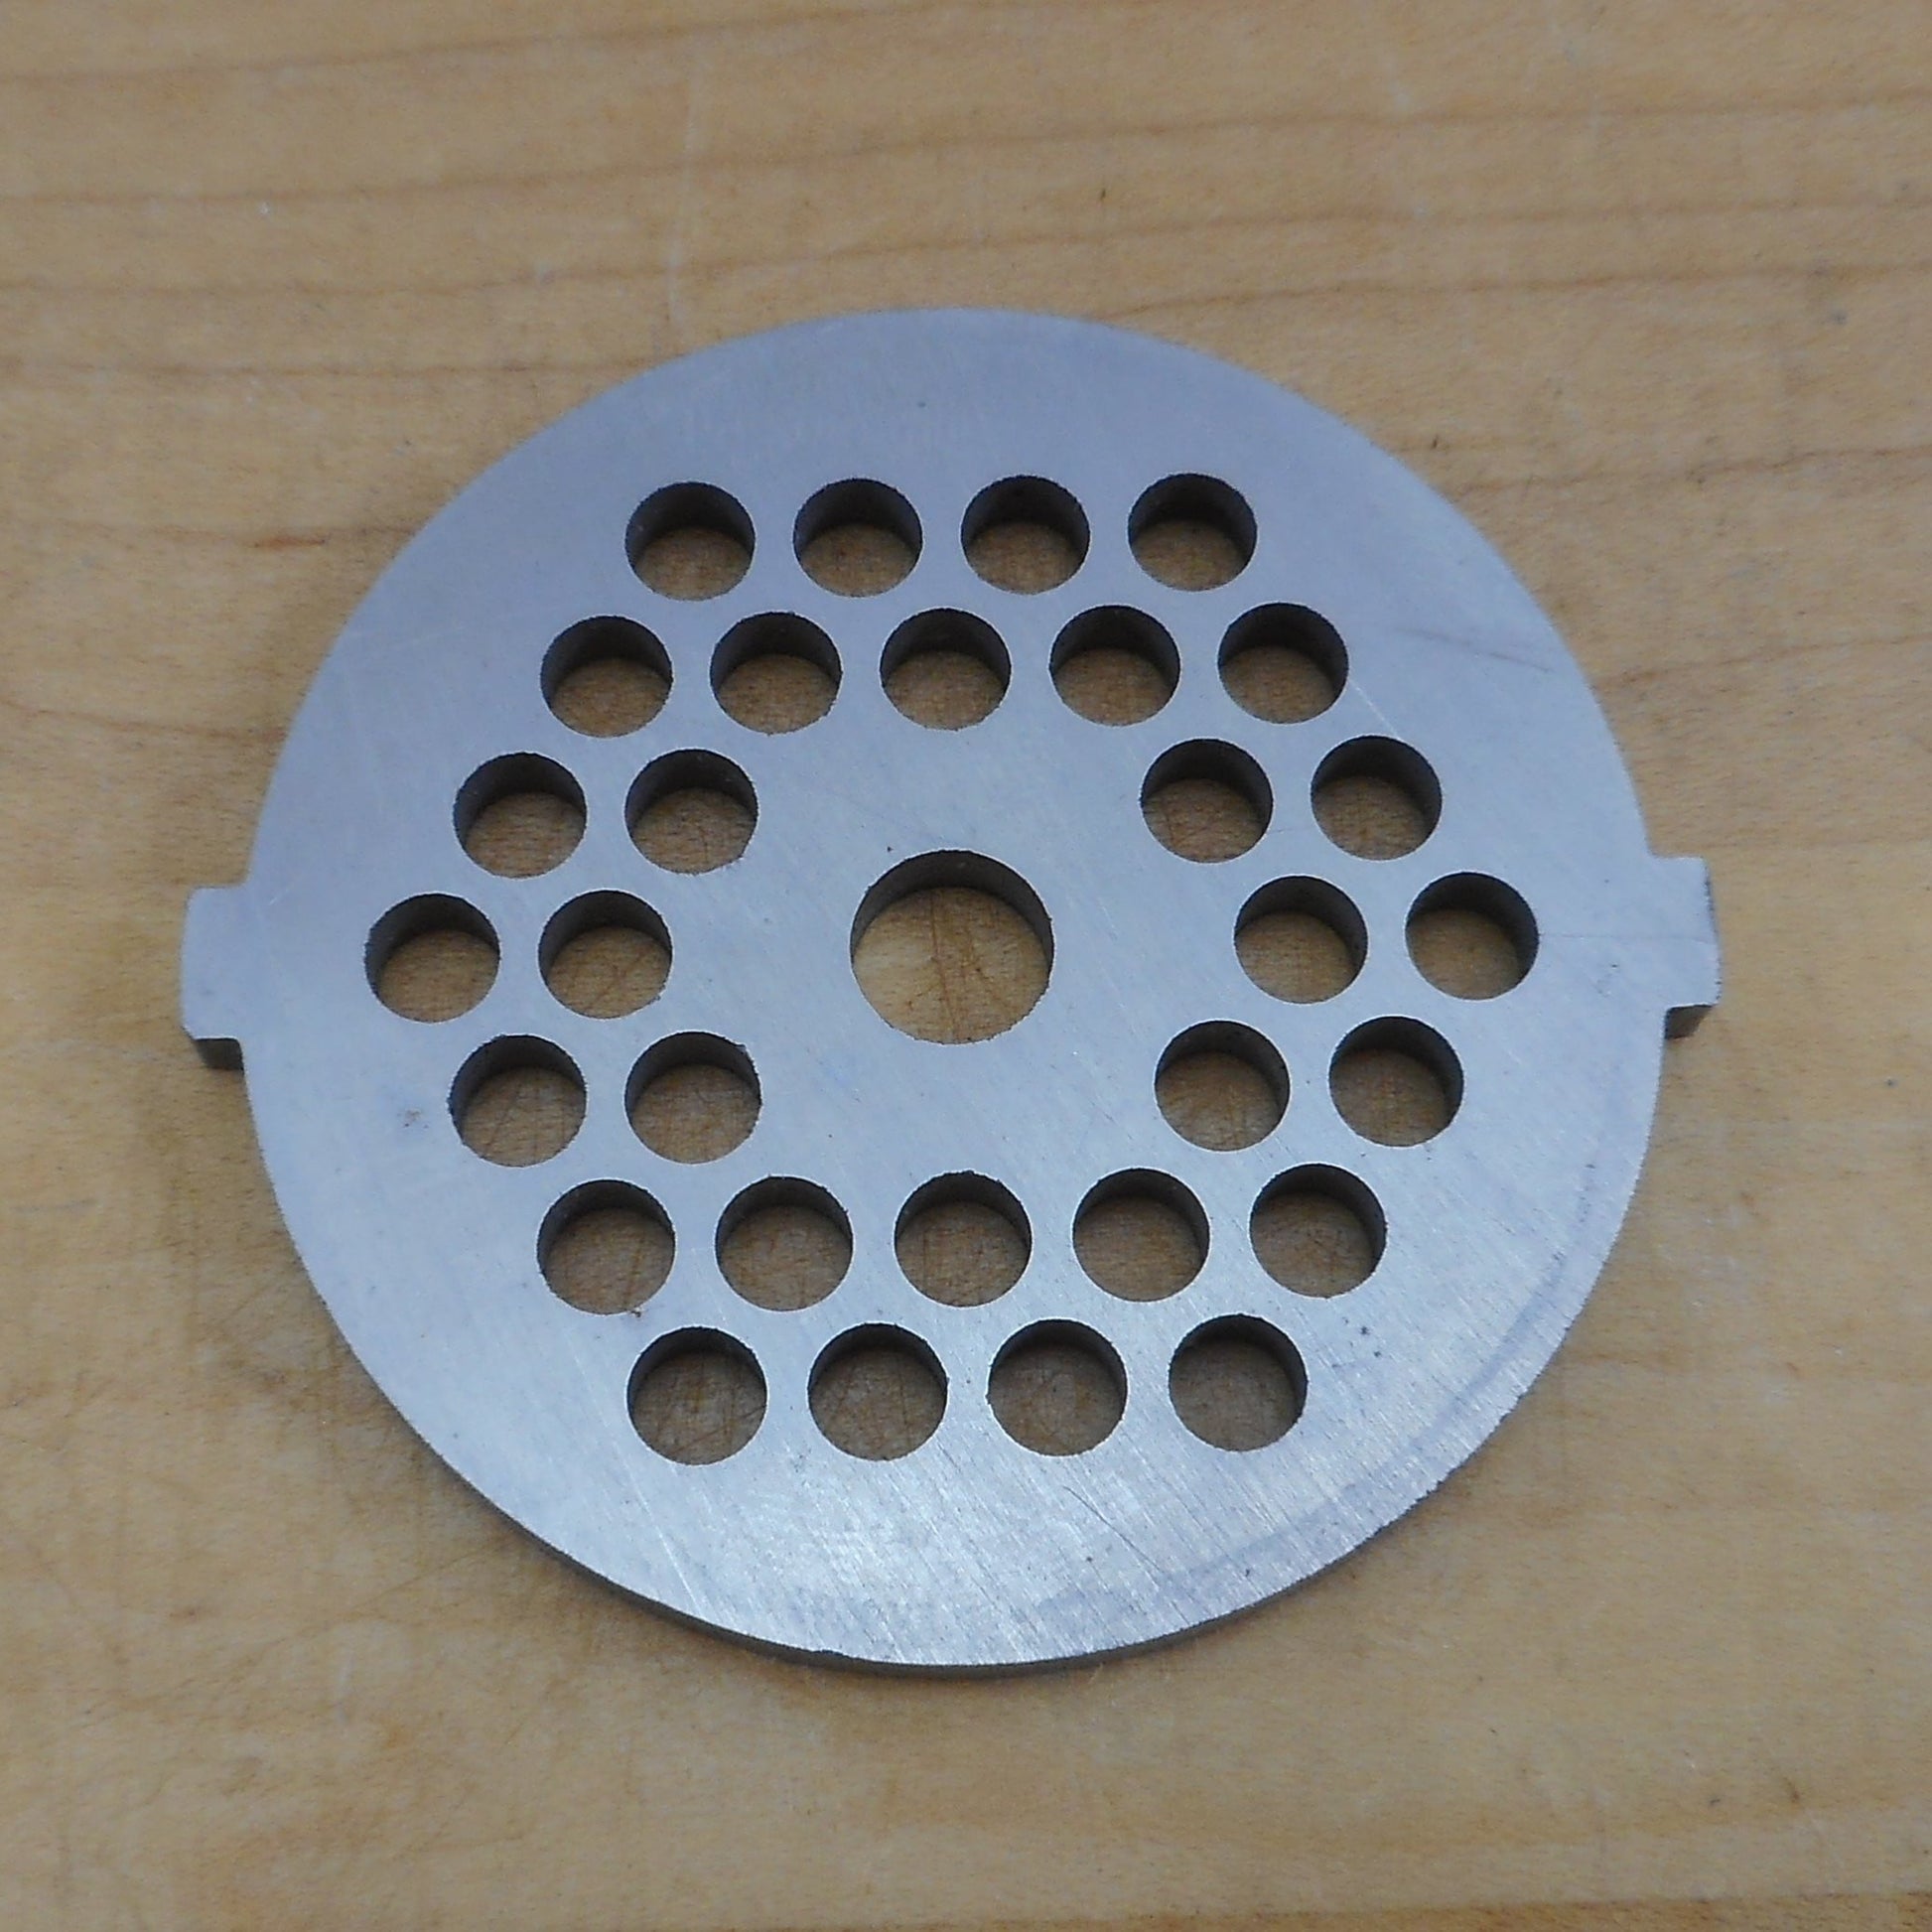 Sunmile Meat Grinder SM-G31 Replacement Part - Grind Plate Disc 3/16" Holes